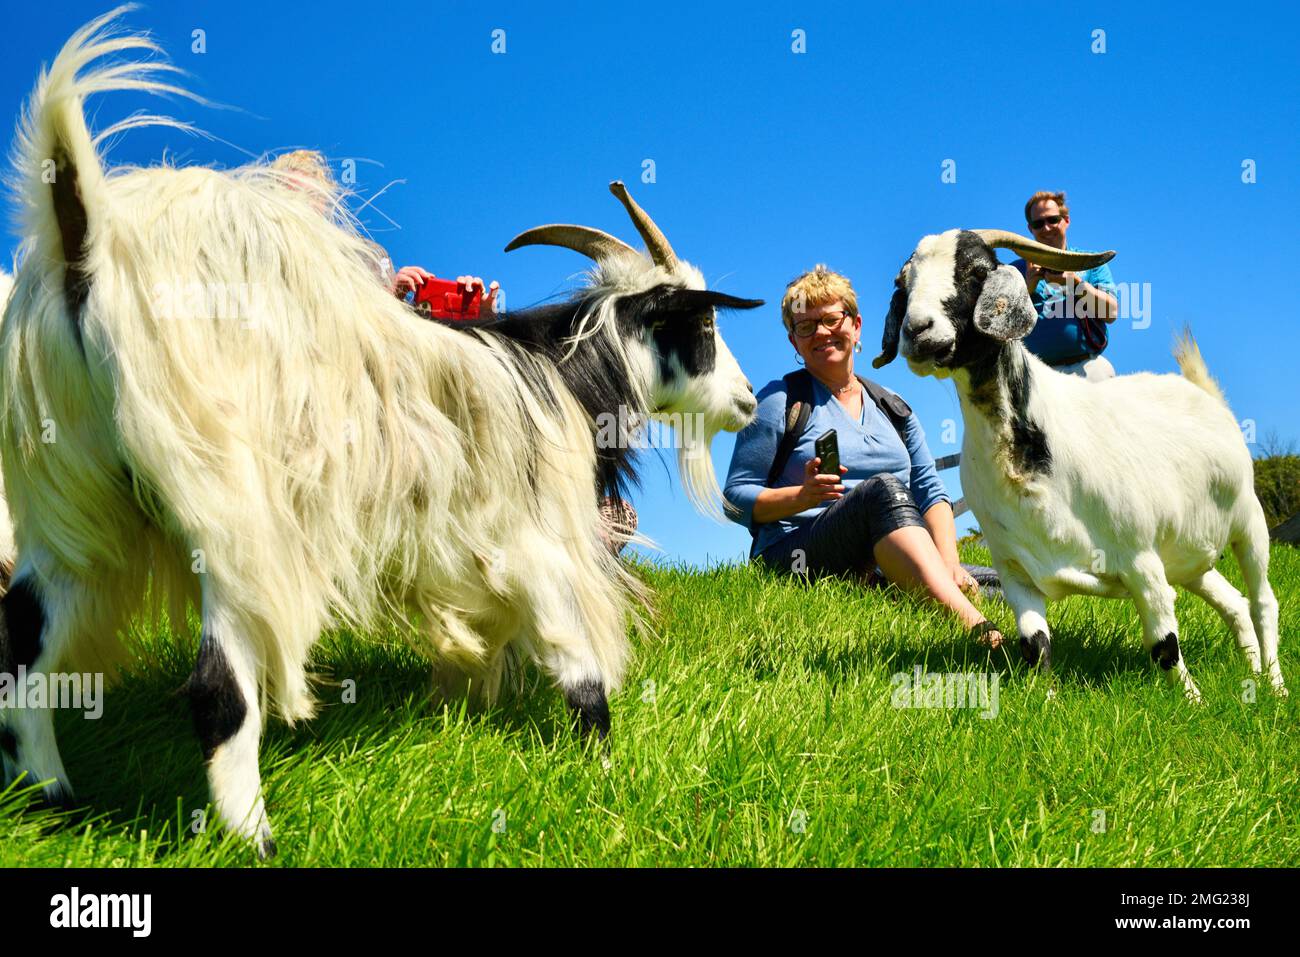 Goats graze on the grassy roof of Al Johnson's Swedish Restaurant and outdoor Stabbur Bar and Kitchen, Door County, Sister Bay, WI, USA Stock Photo